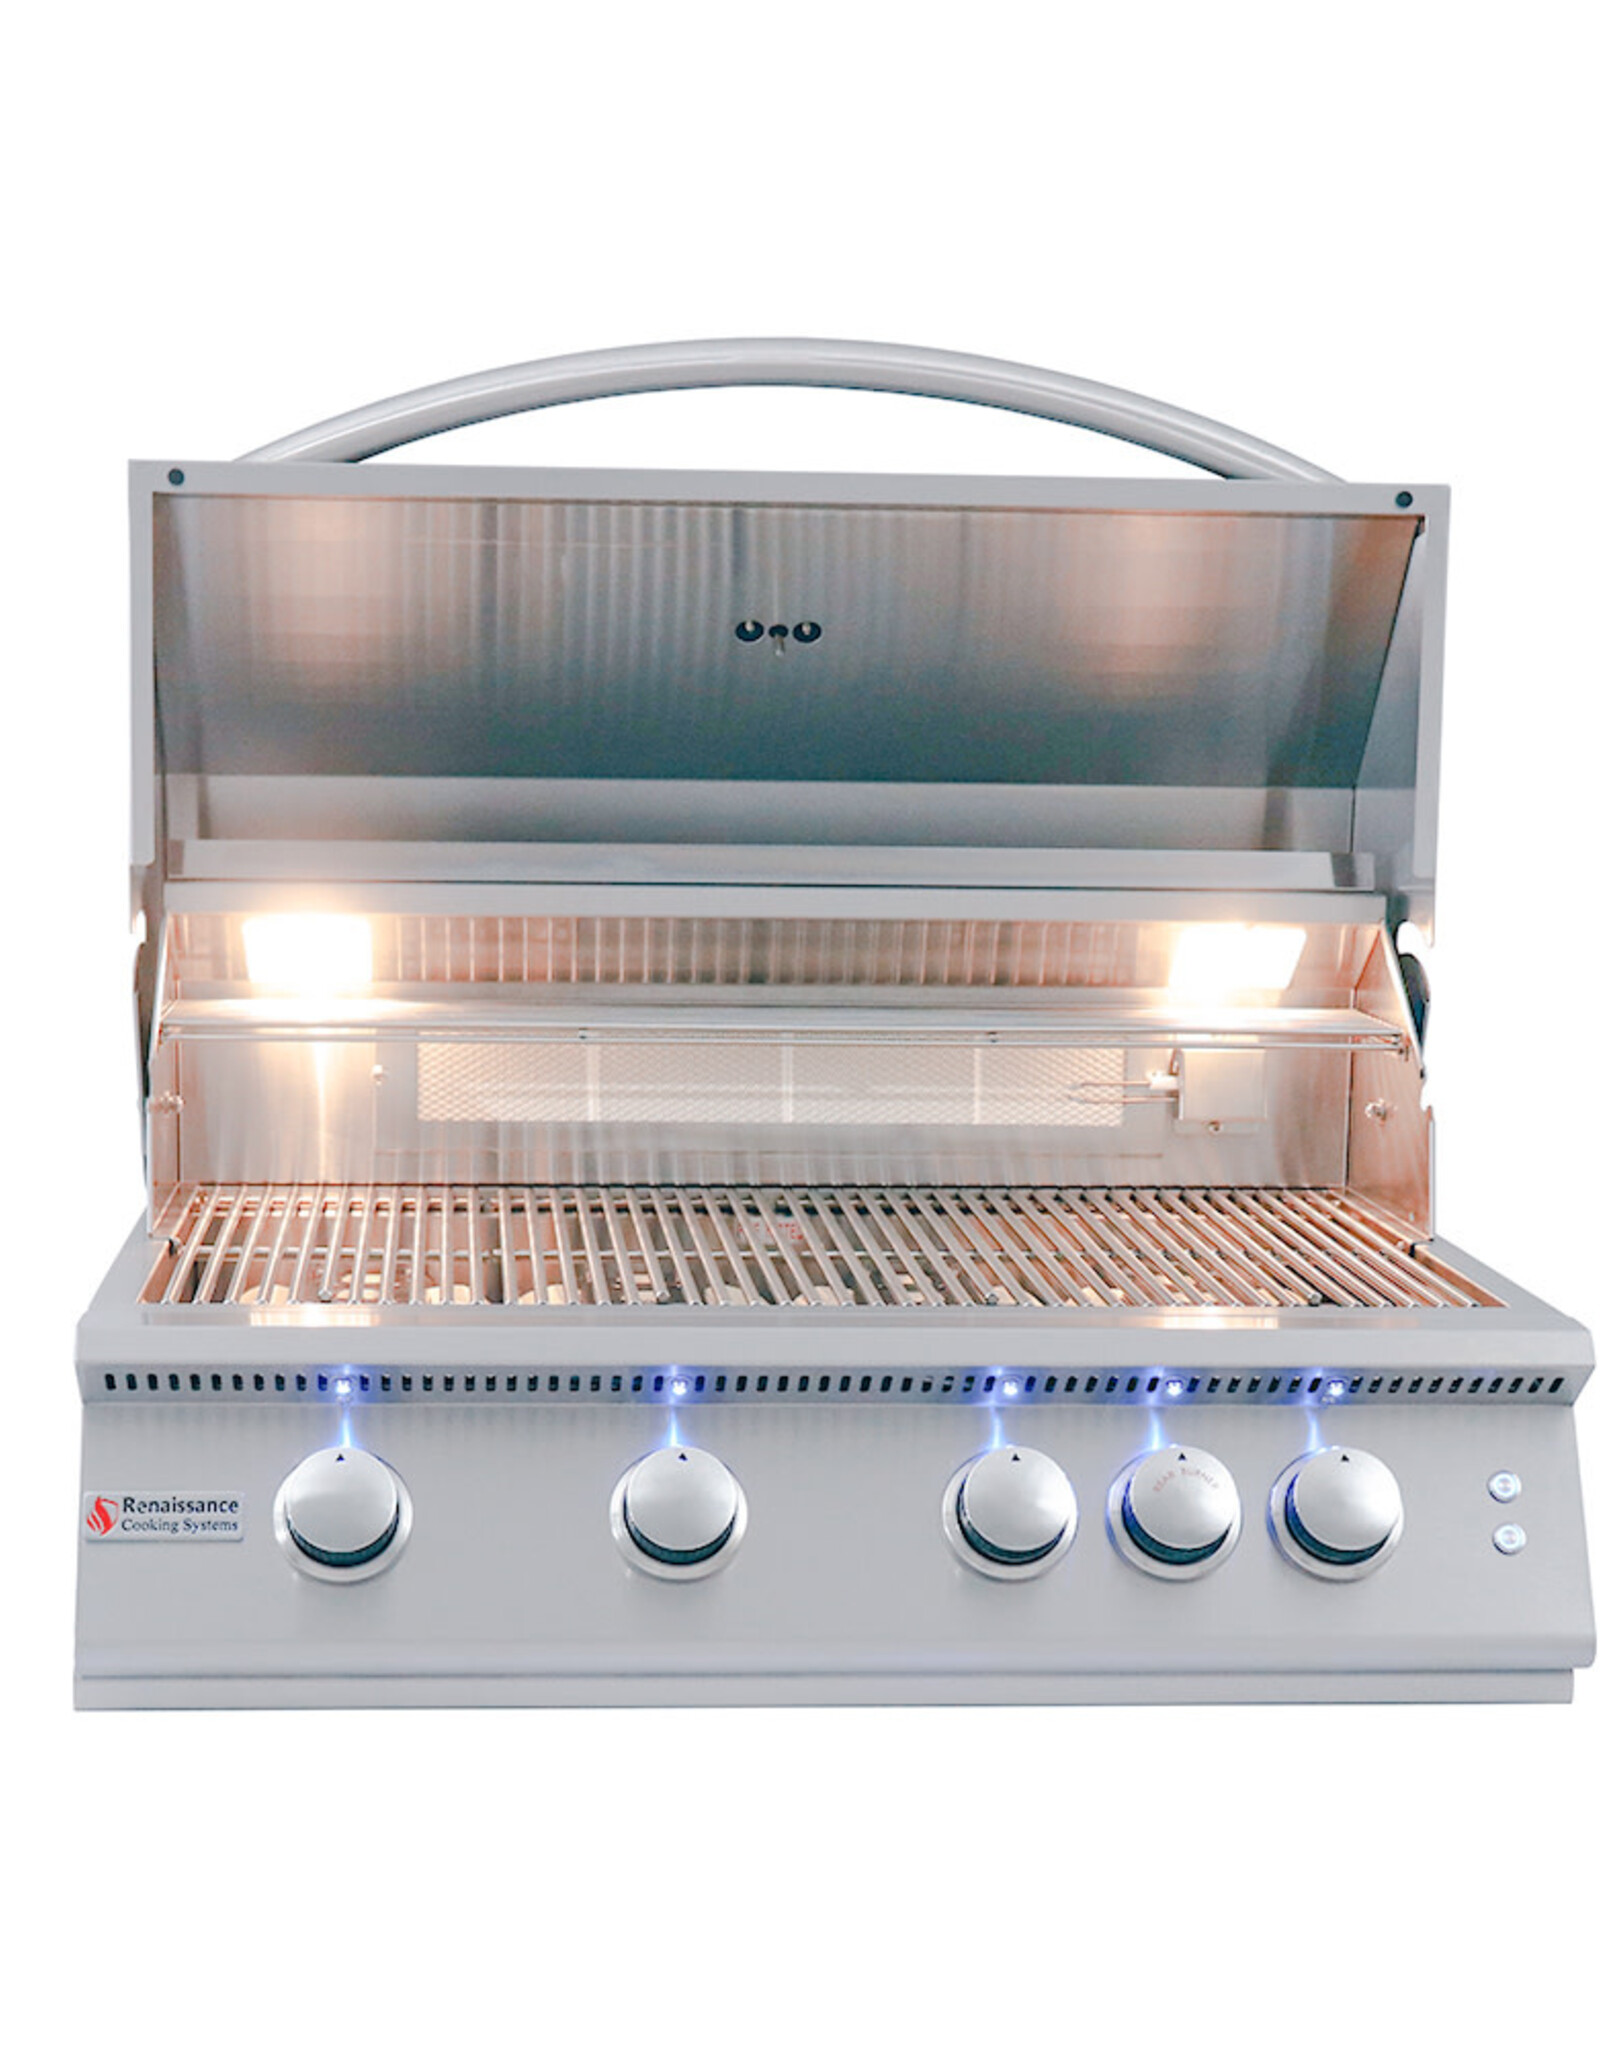 Renaissance Cooking Systems Renaissance Cooking Systems 32" Premier Drop-In Grill W / Rear Burner & LED Lights - Natural Gas - RJC32AL